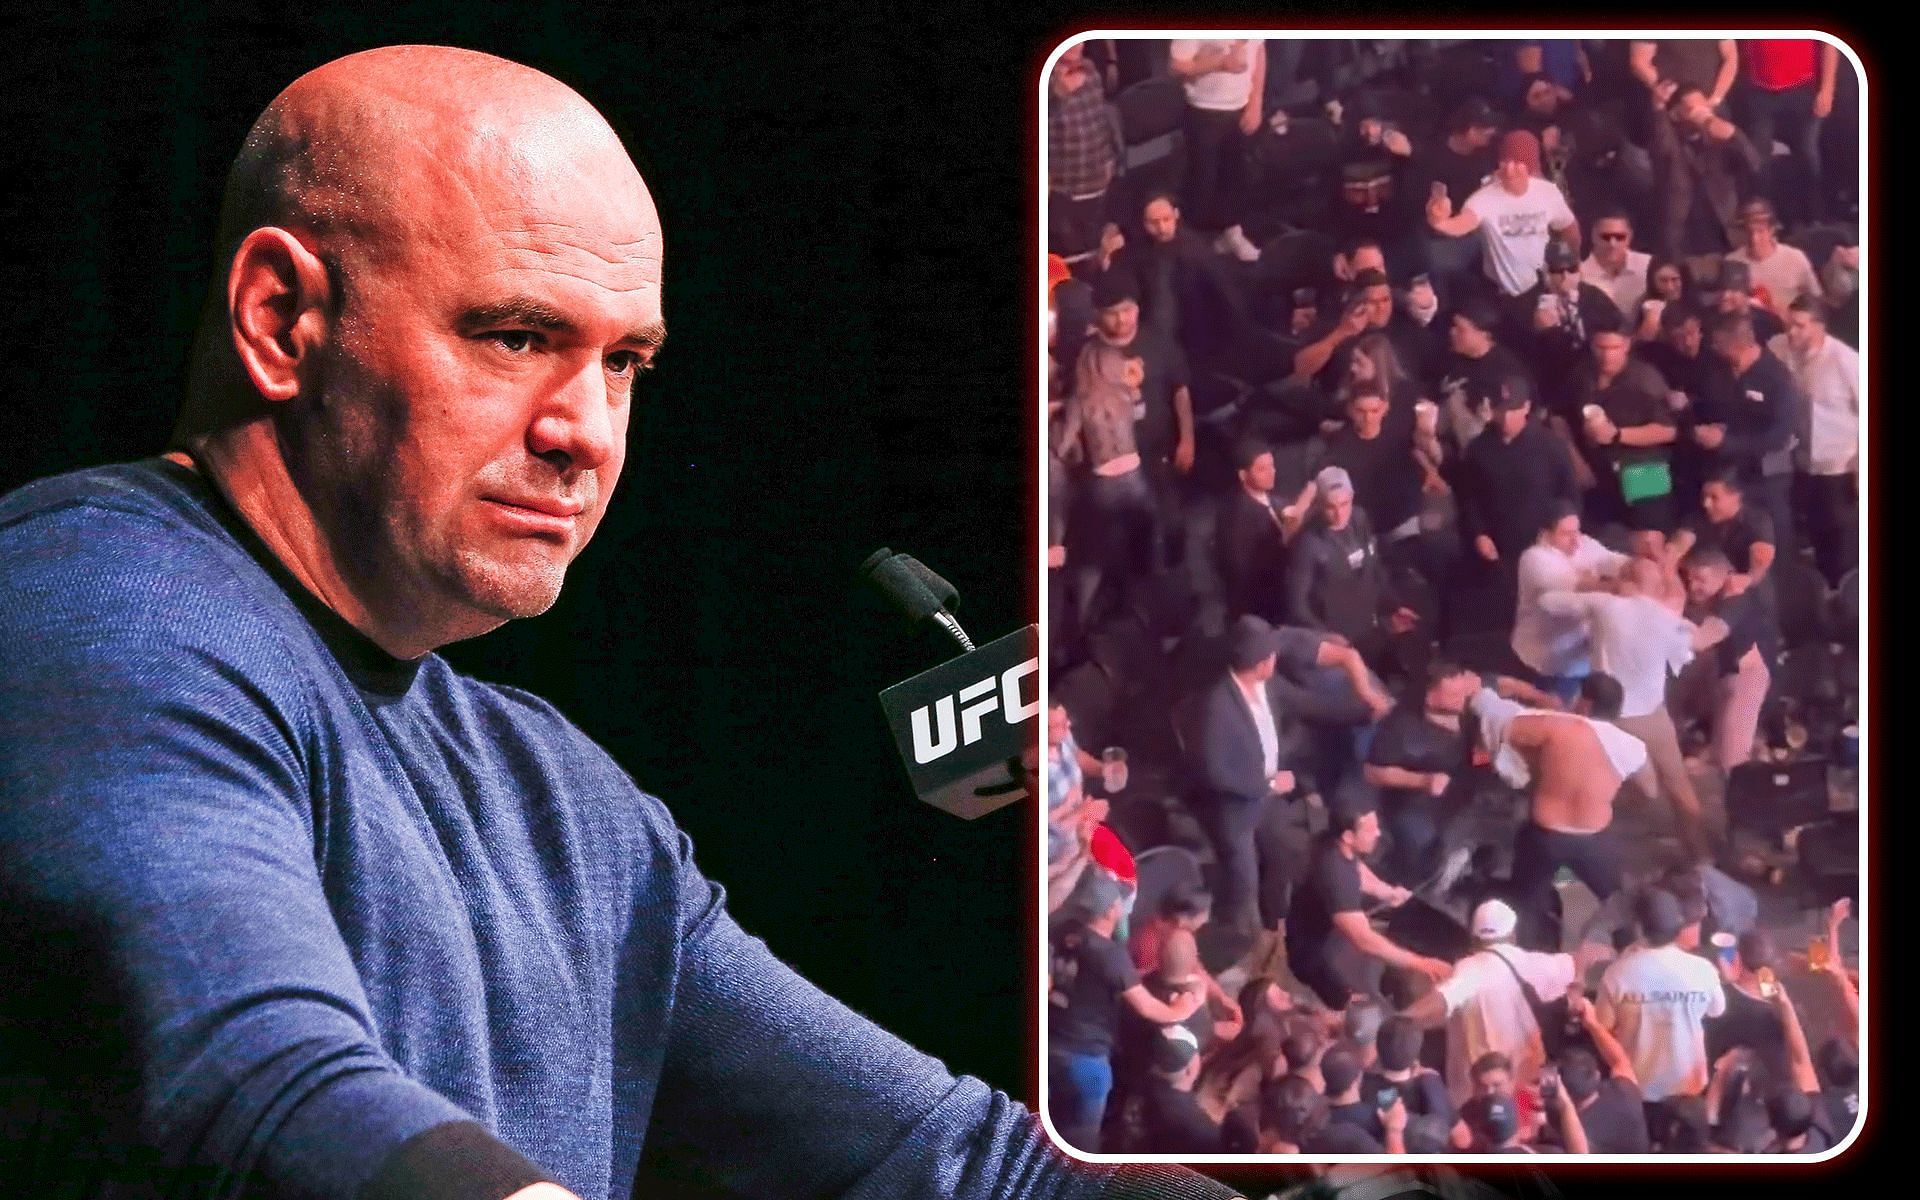 Dana White (left) reacted to the UFC Mexico brawl (right) [Images Courtesy: Getty Images and @MikeyThomas1991 X]